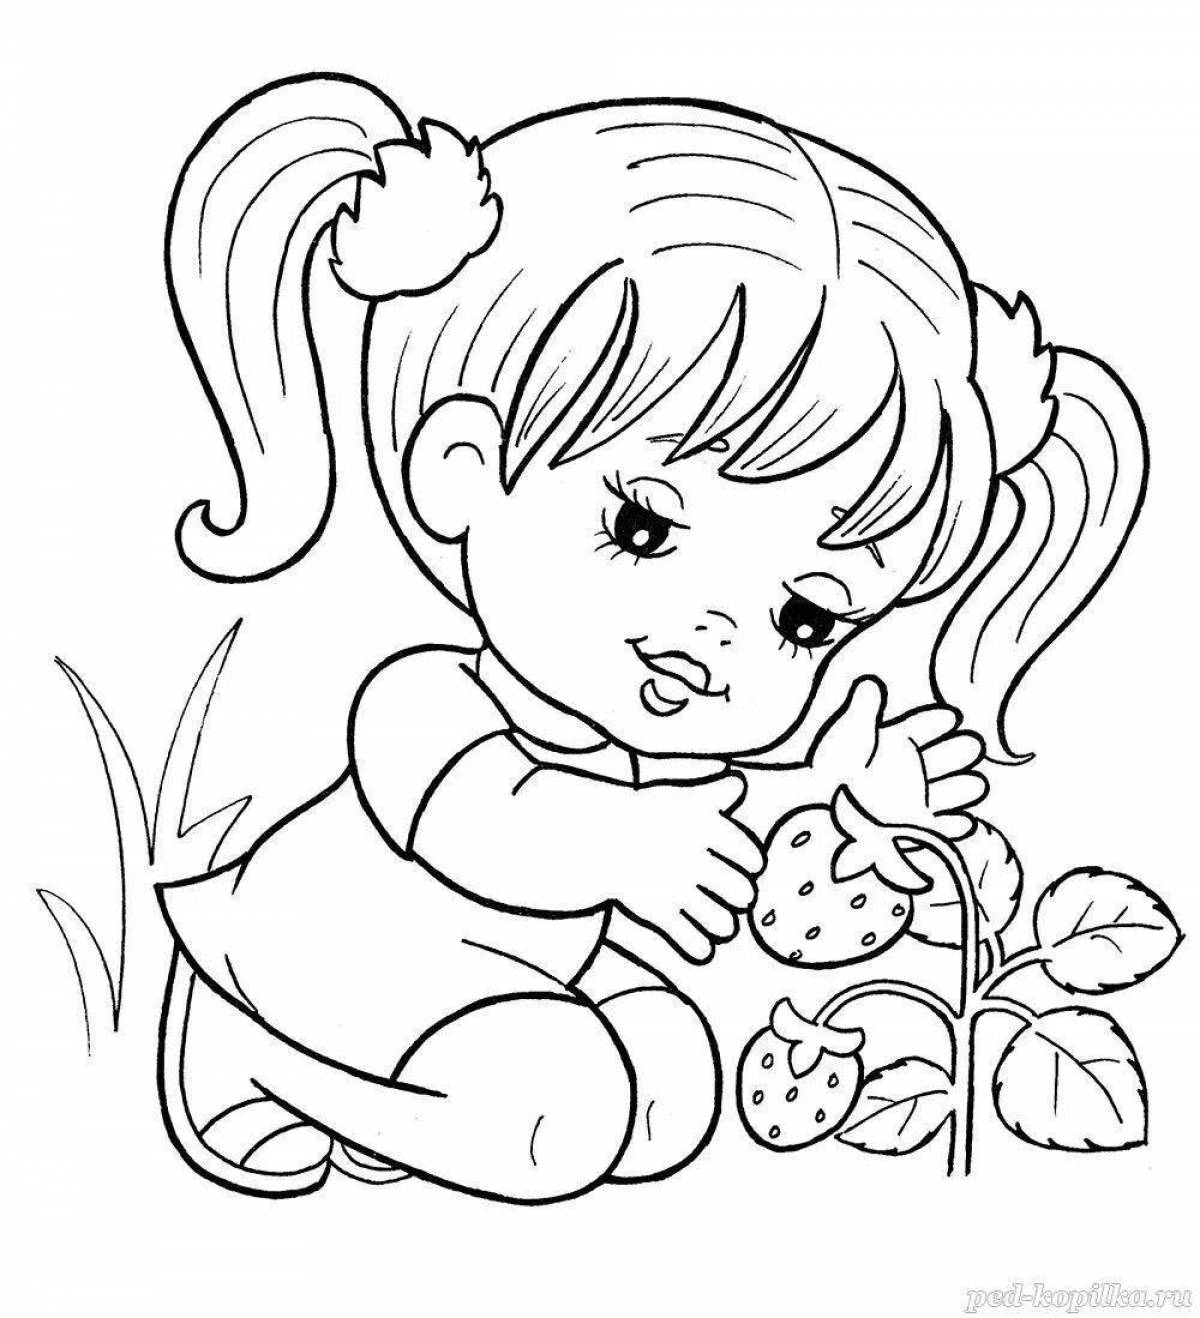 Cute coloring book for 3 year old girls